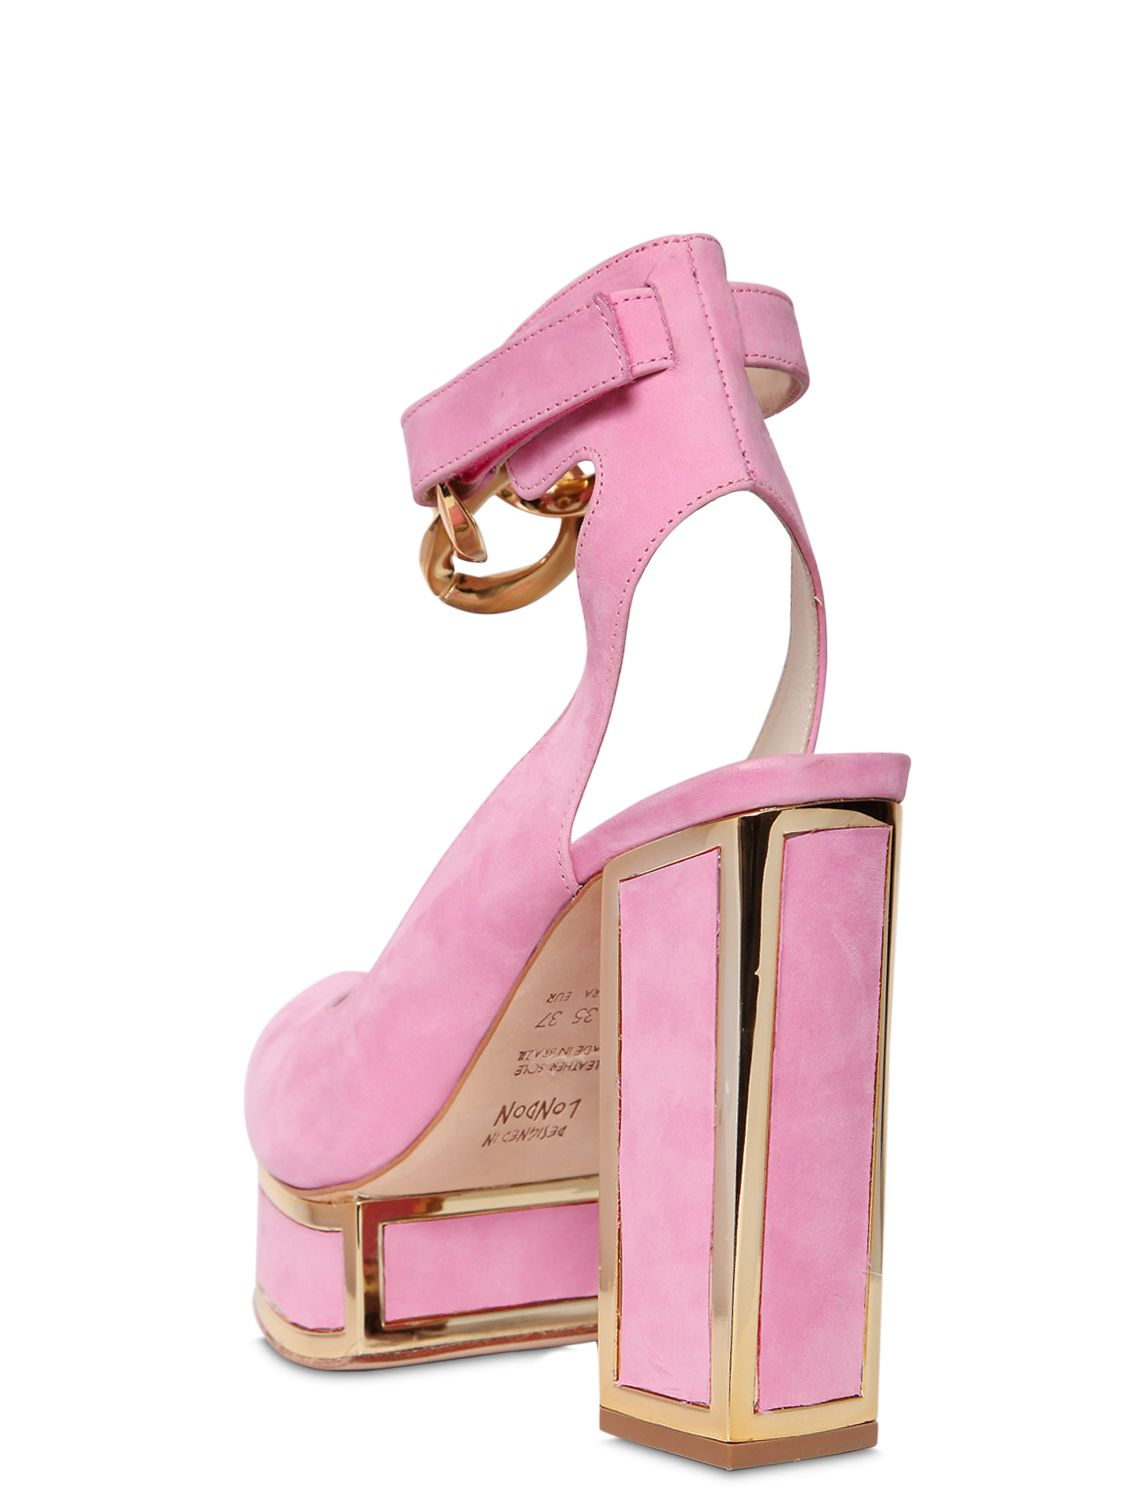 Lyst - Kat maconie 120Mm Suede Sandals With Chain Detail in Pink